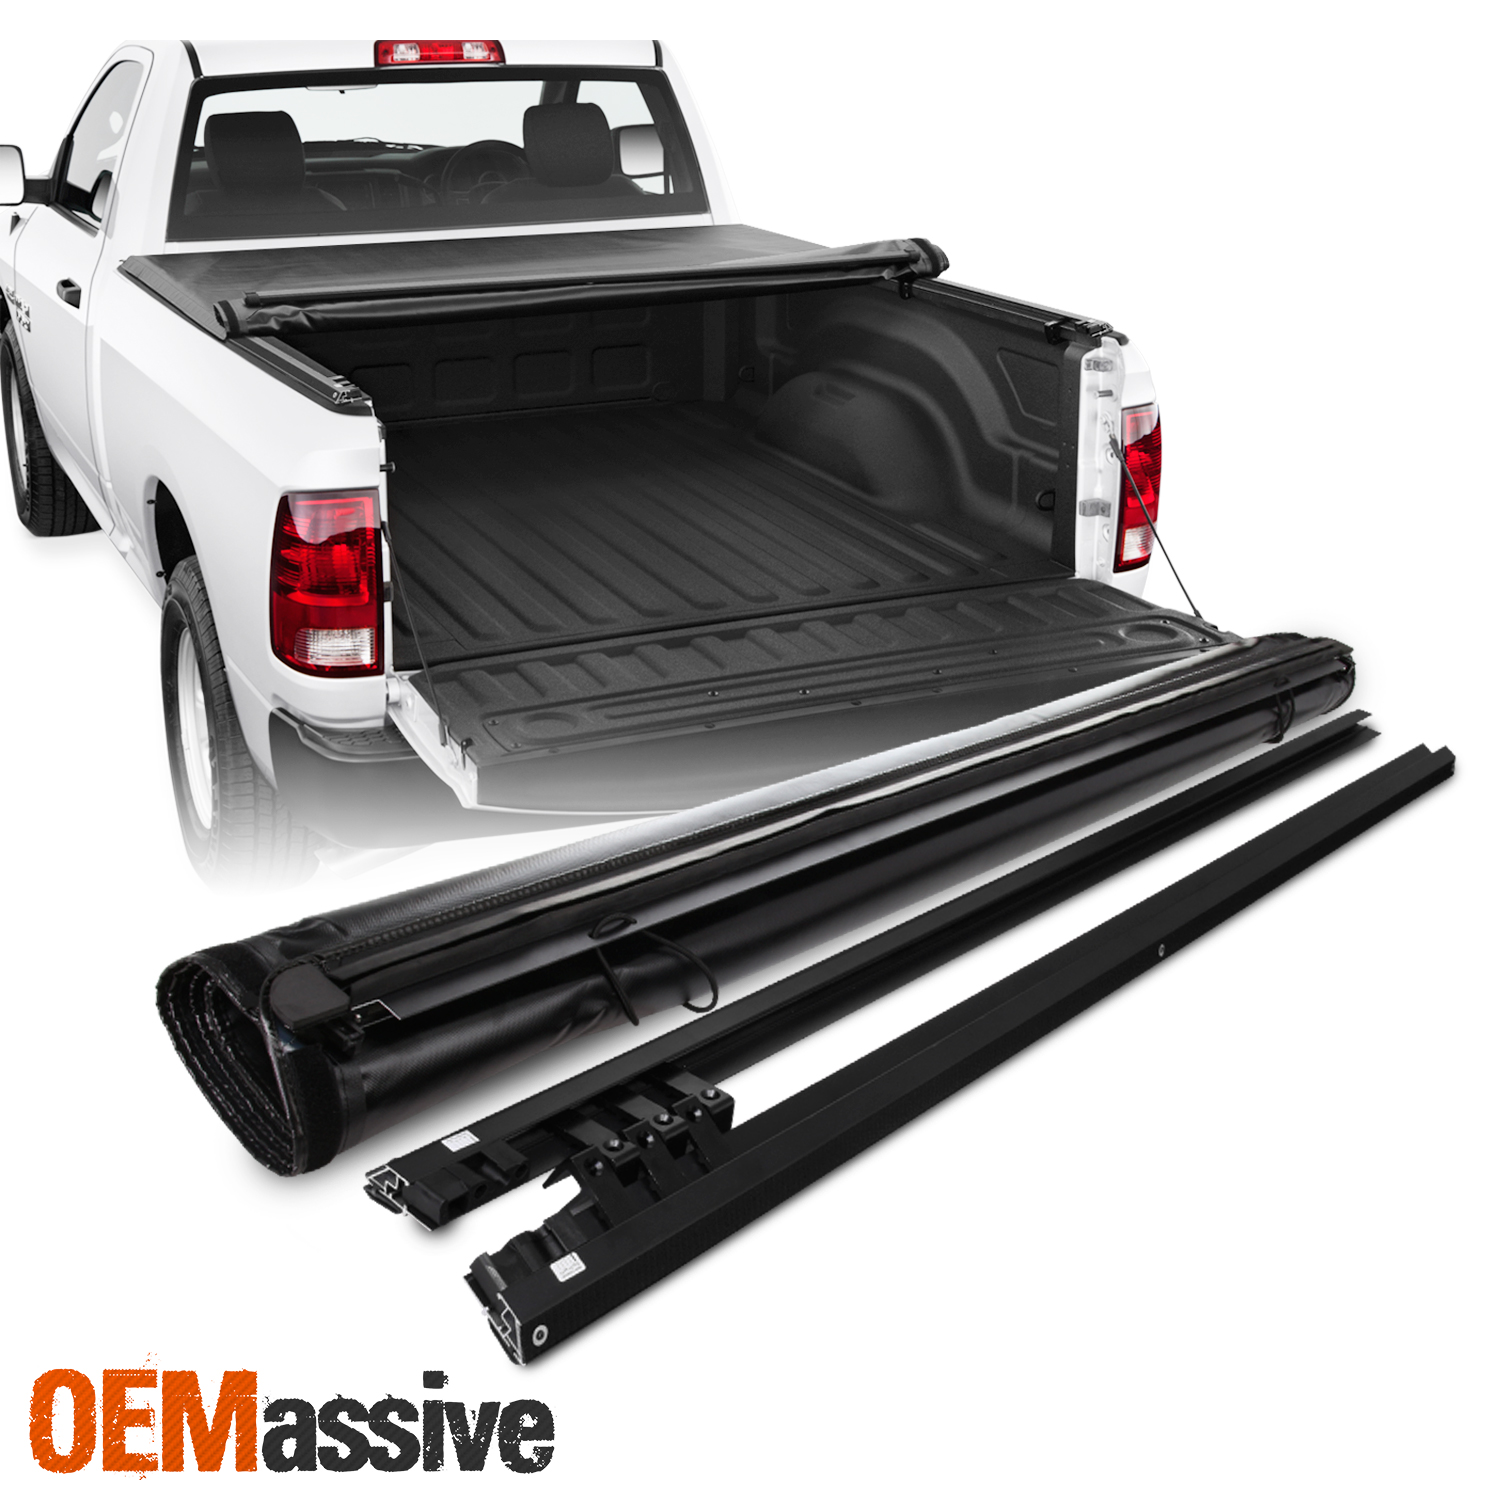 For 2009-2018 Dodge Ram 1500/ 2500/ 3500 67" Crew Cab Soft Roll Up Tonneau Cover | eBay 2016 Ram 1500 Crew Cab Bed Cover